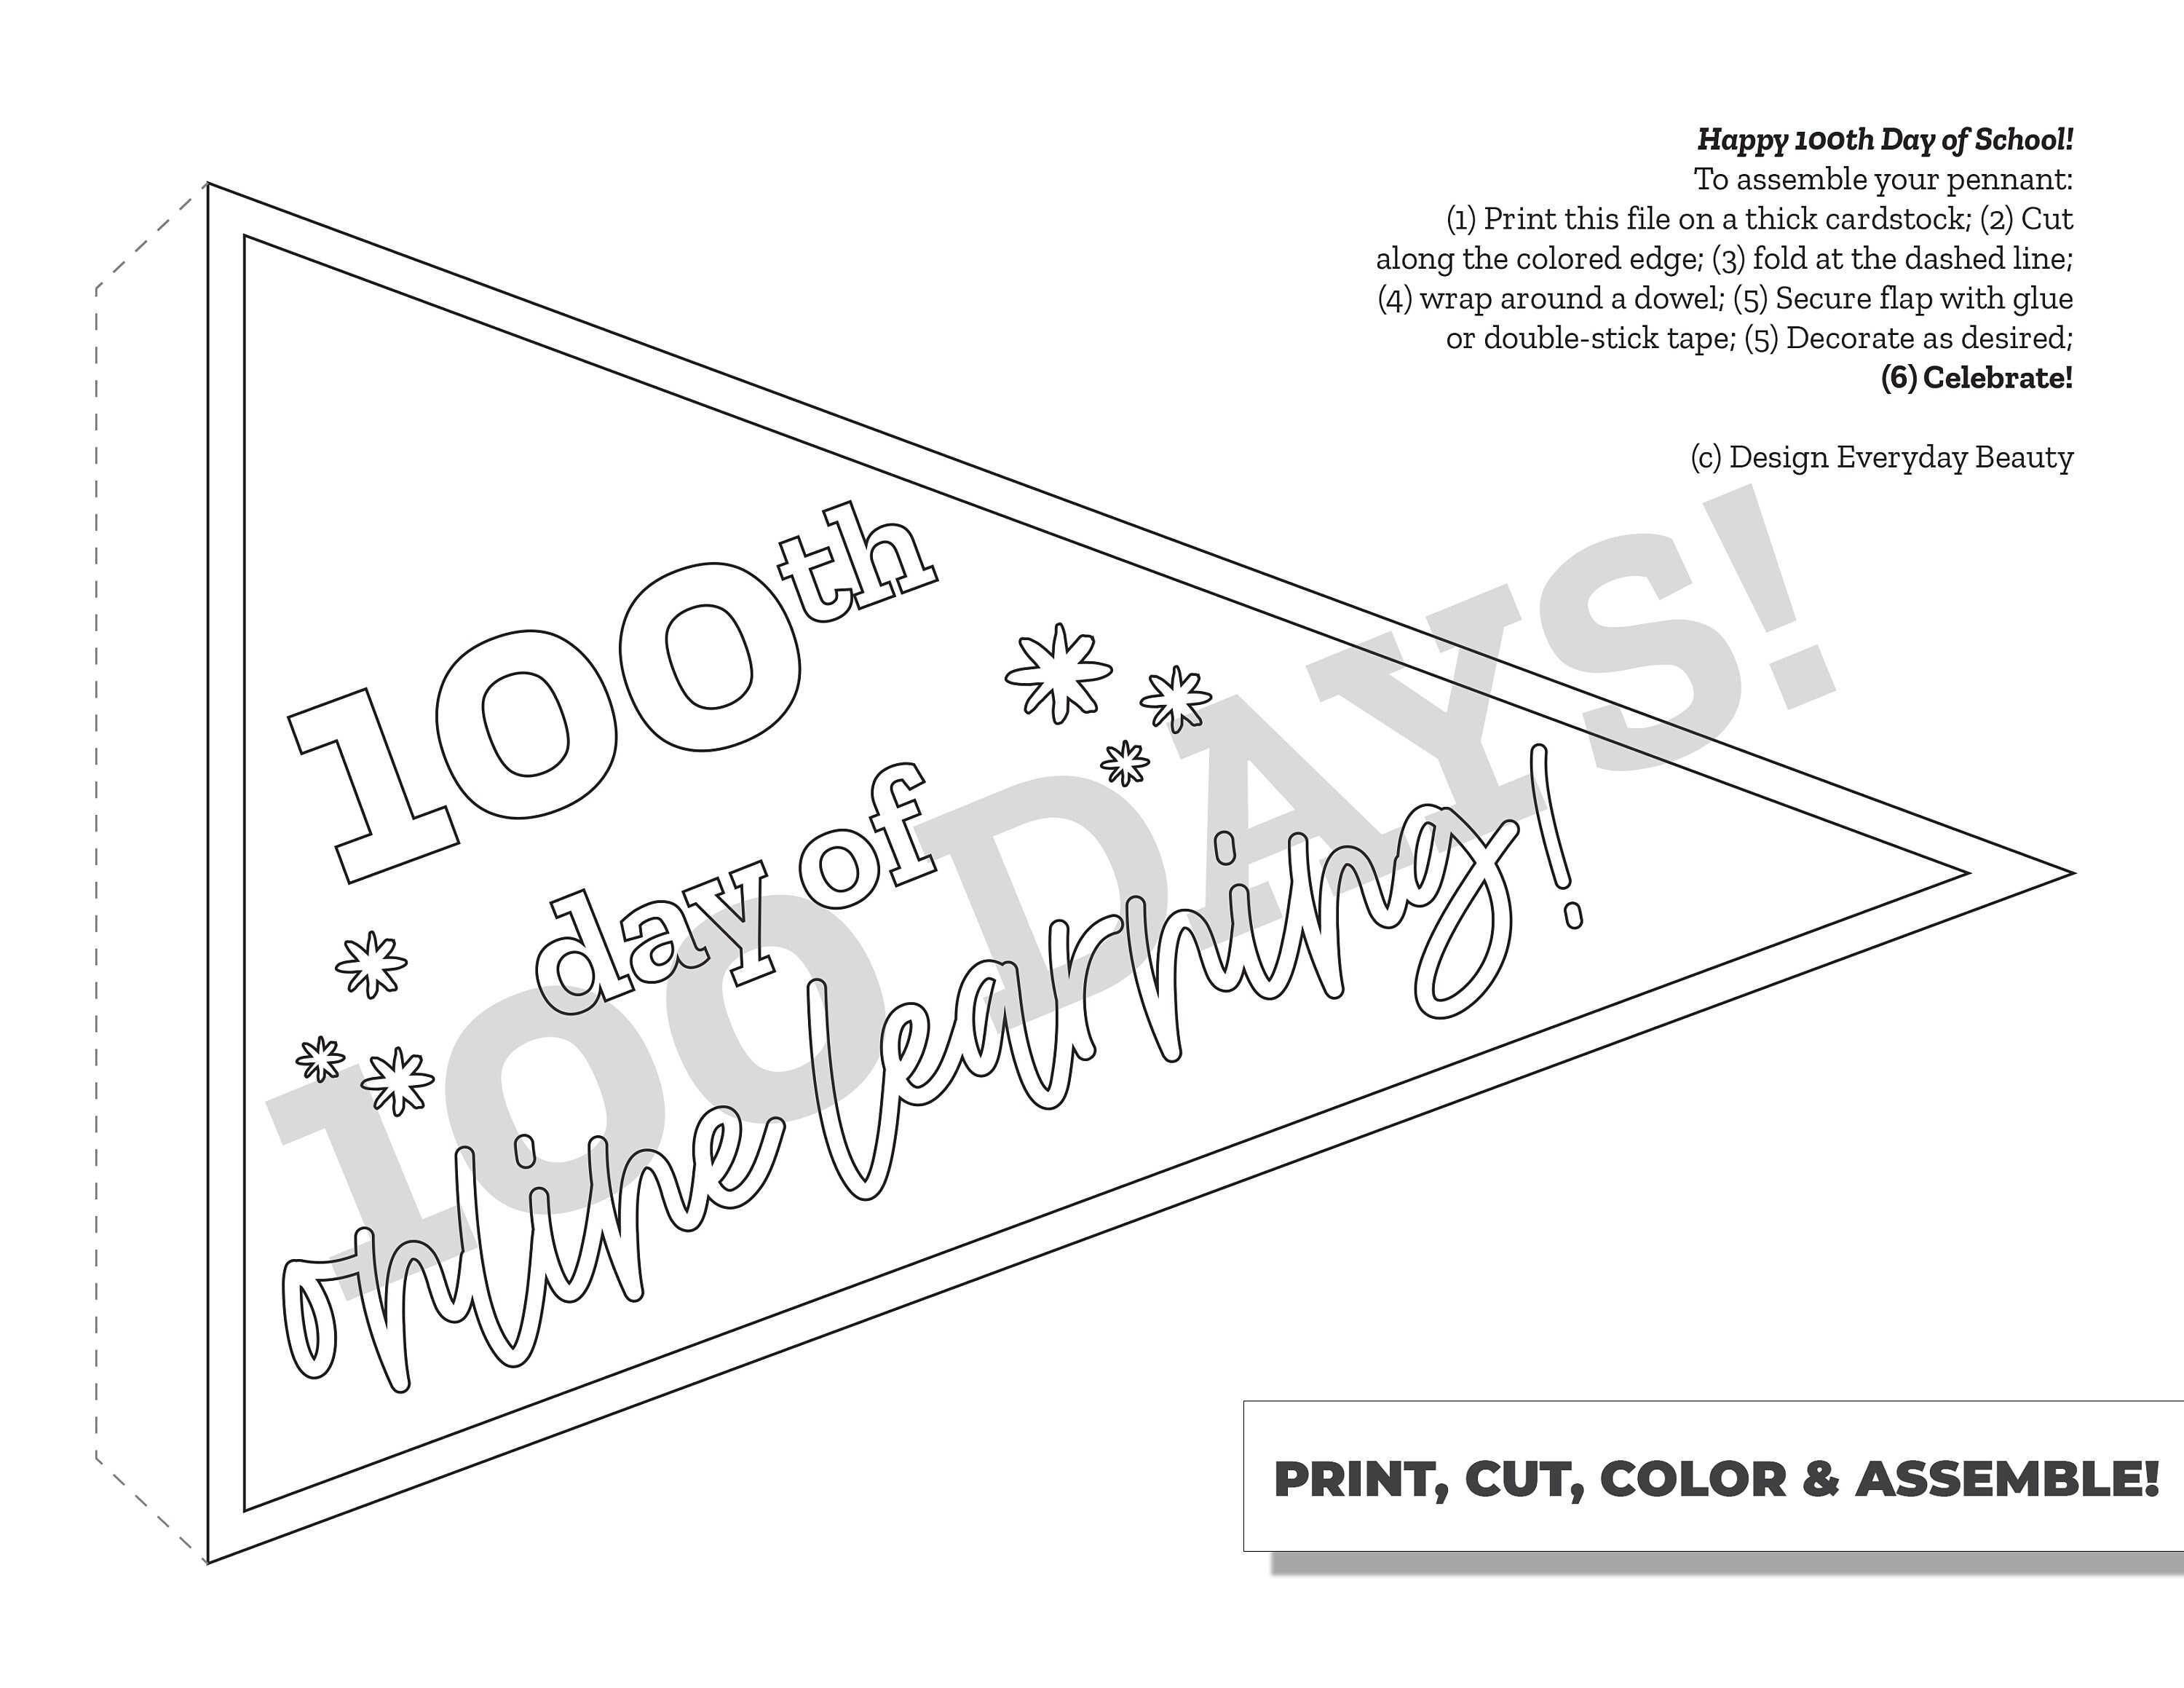 Th day of school pennant flag coloring page activity celebrate days of school printable pennant flags for classroom celebration